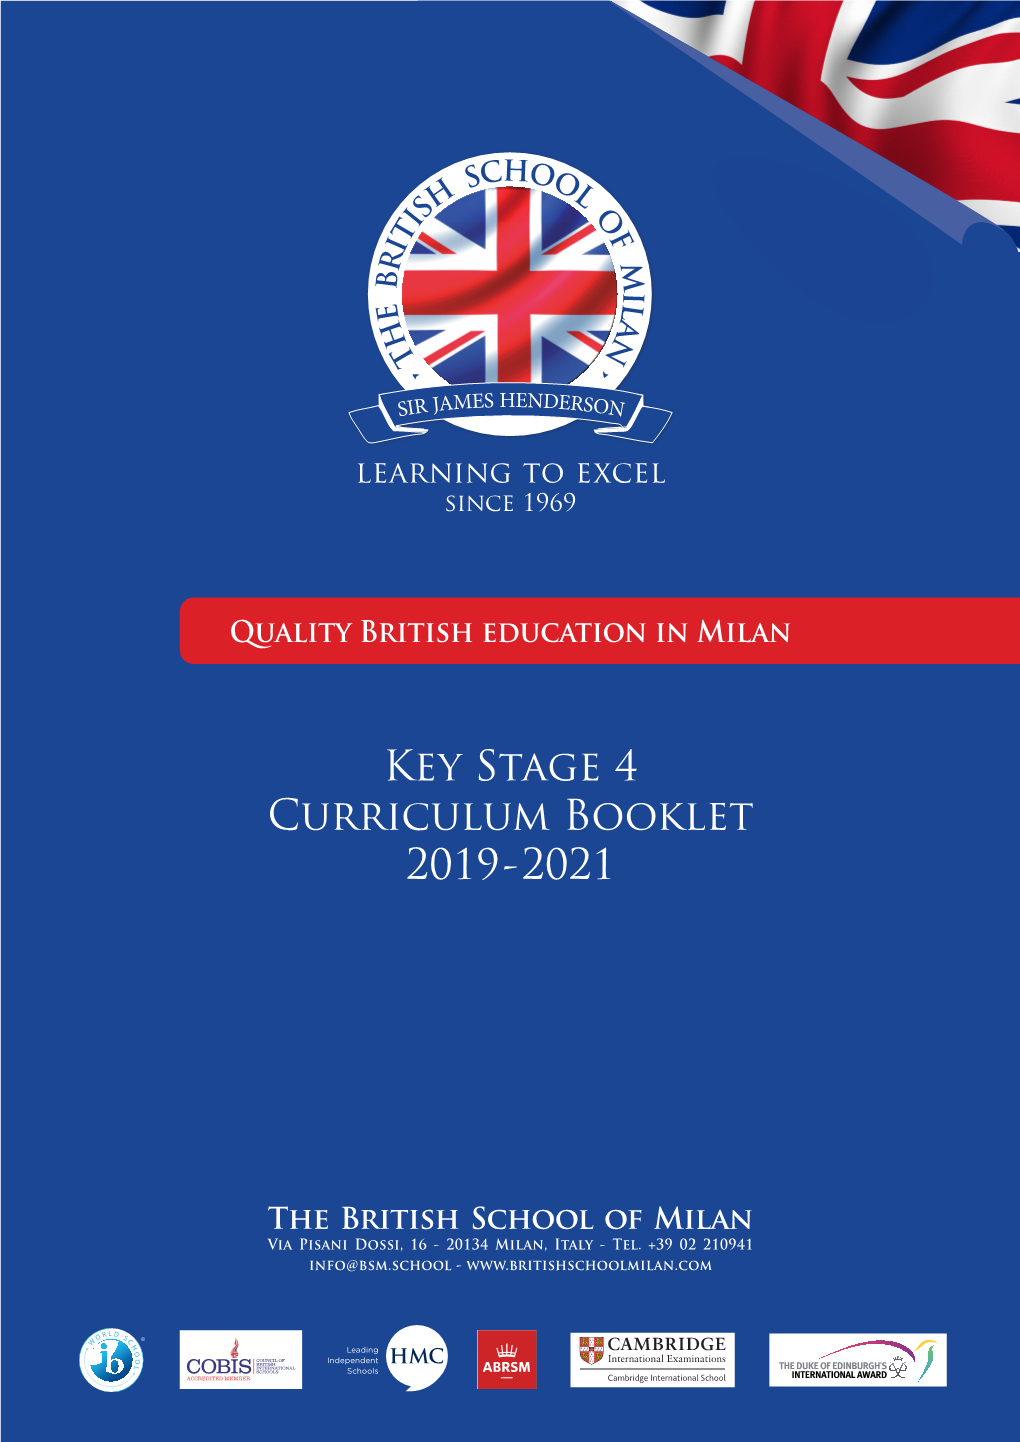 Key Stage 4 Curriculum Booklet 2019-2021